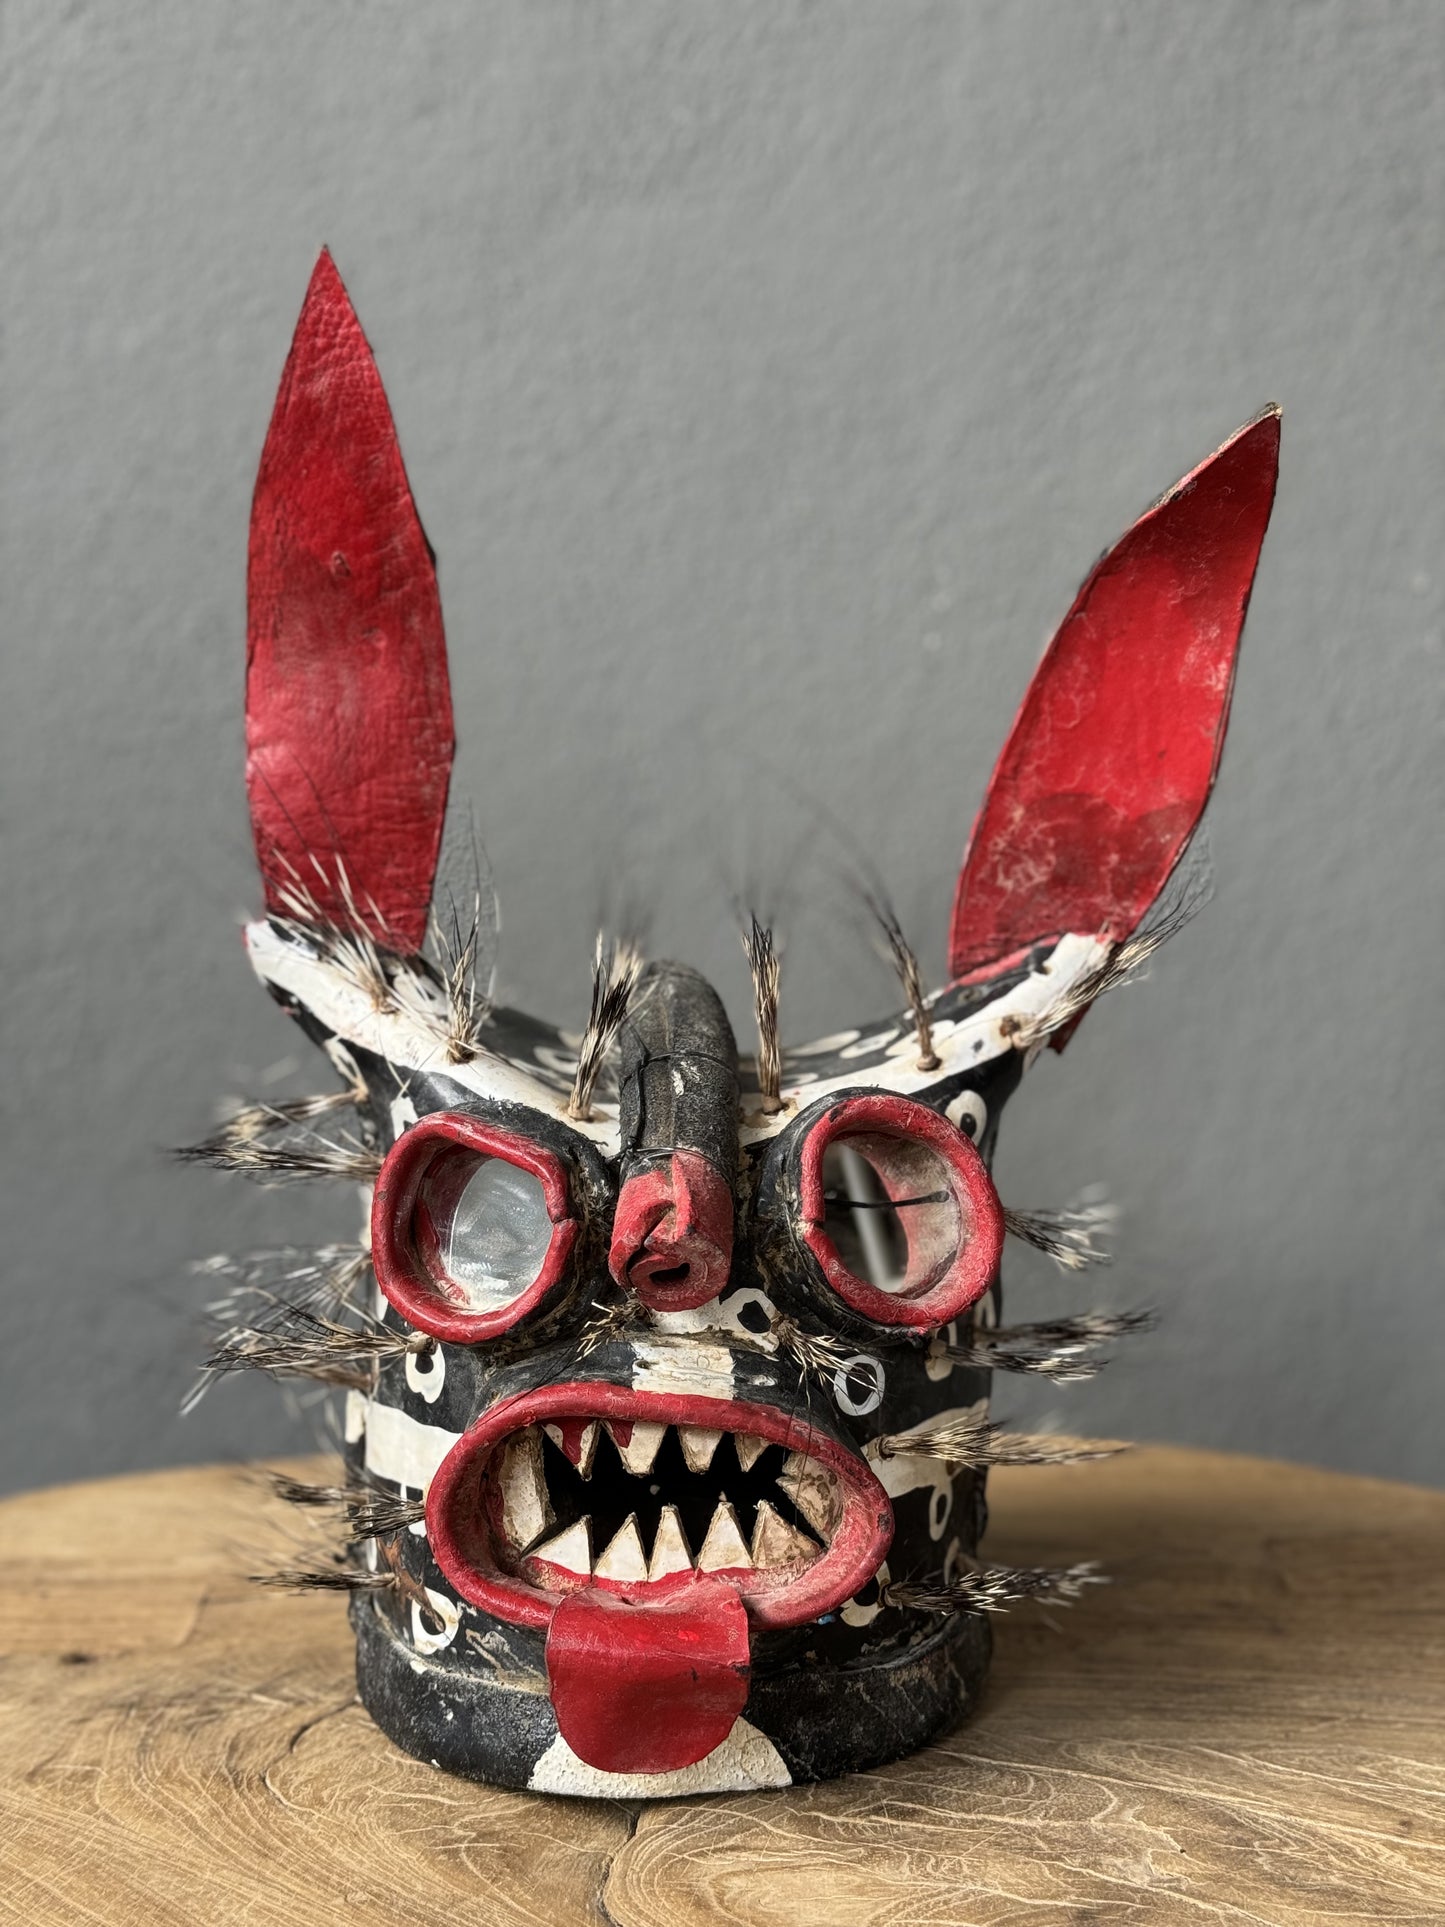 Contemporary Leather Tiger Mask From Zitlala, Guerrero.